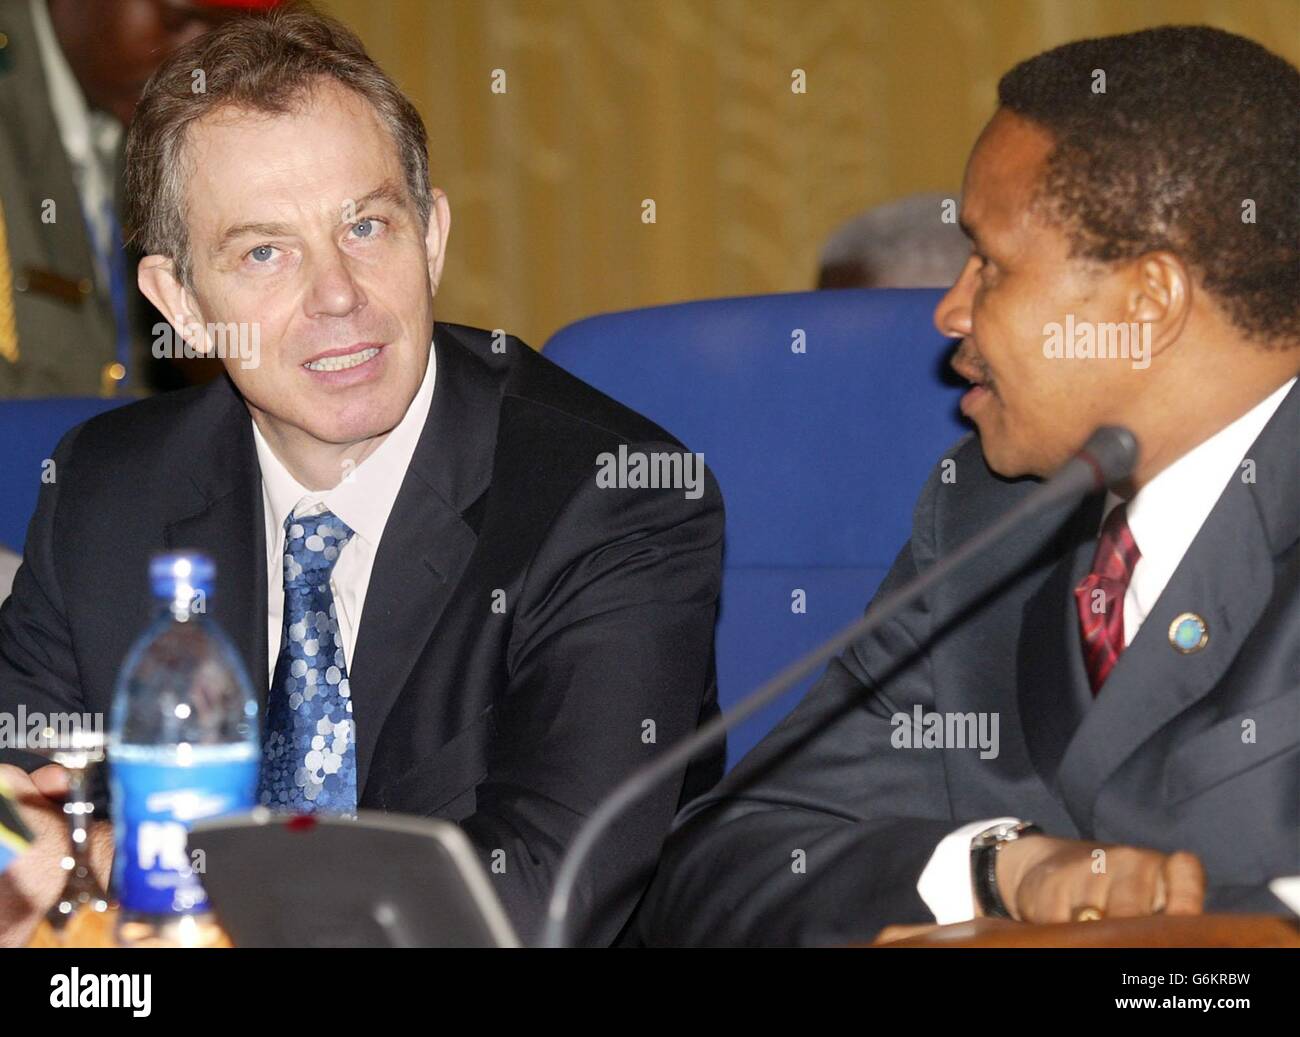 British Prime Minister Tony Blair,(L),speaks with Tanzanian President Benjamin William Mkapa at the start of the First Executive session of the Commonwealth Heads of Government Meeting in Abuja, Nigeria. Blair today failed to get the swift resolution he wanted to continue Zimbabwe s suspension from the Commonwealth. He had hoped leaders gathered in Nigeria would agree to keep sanctions against Robert Mugabe s Zanu-PF regime in place at the opening session of the summit. Stock Photo